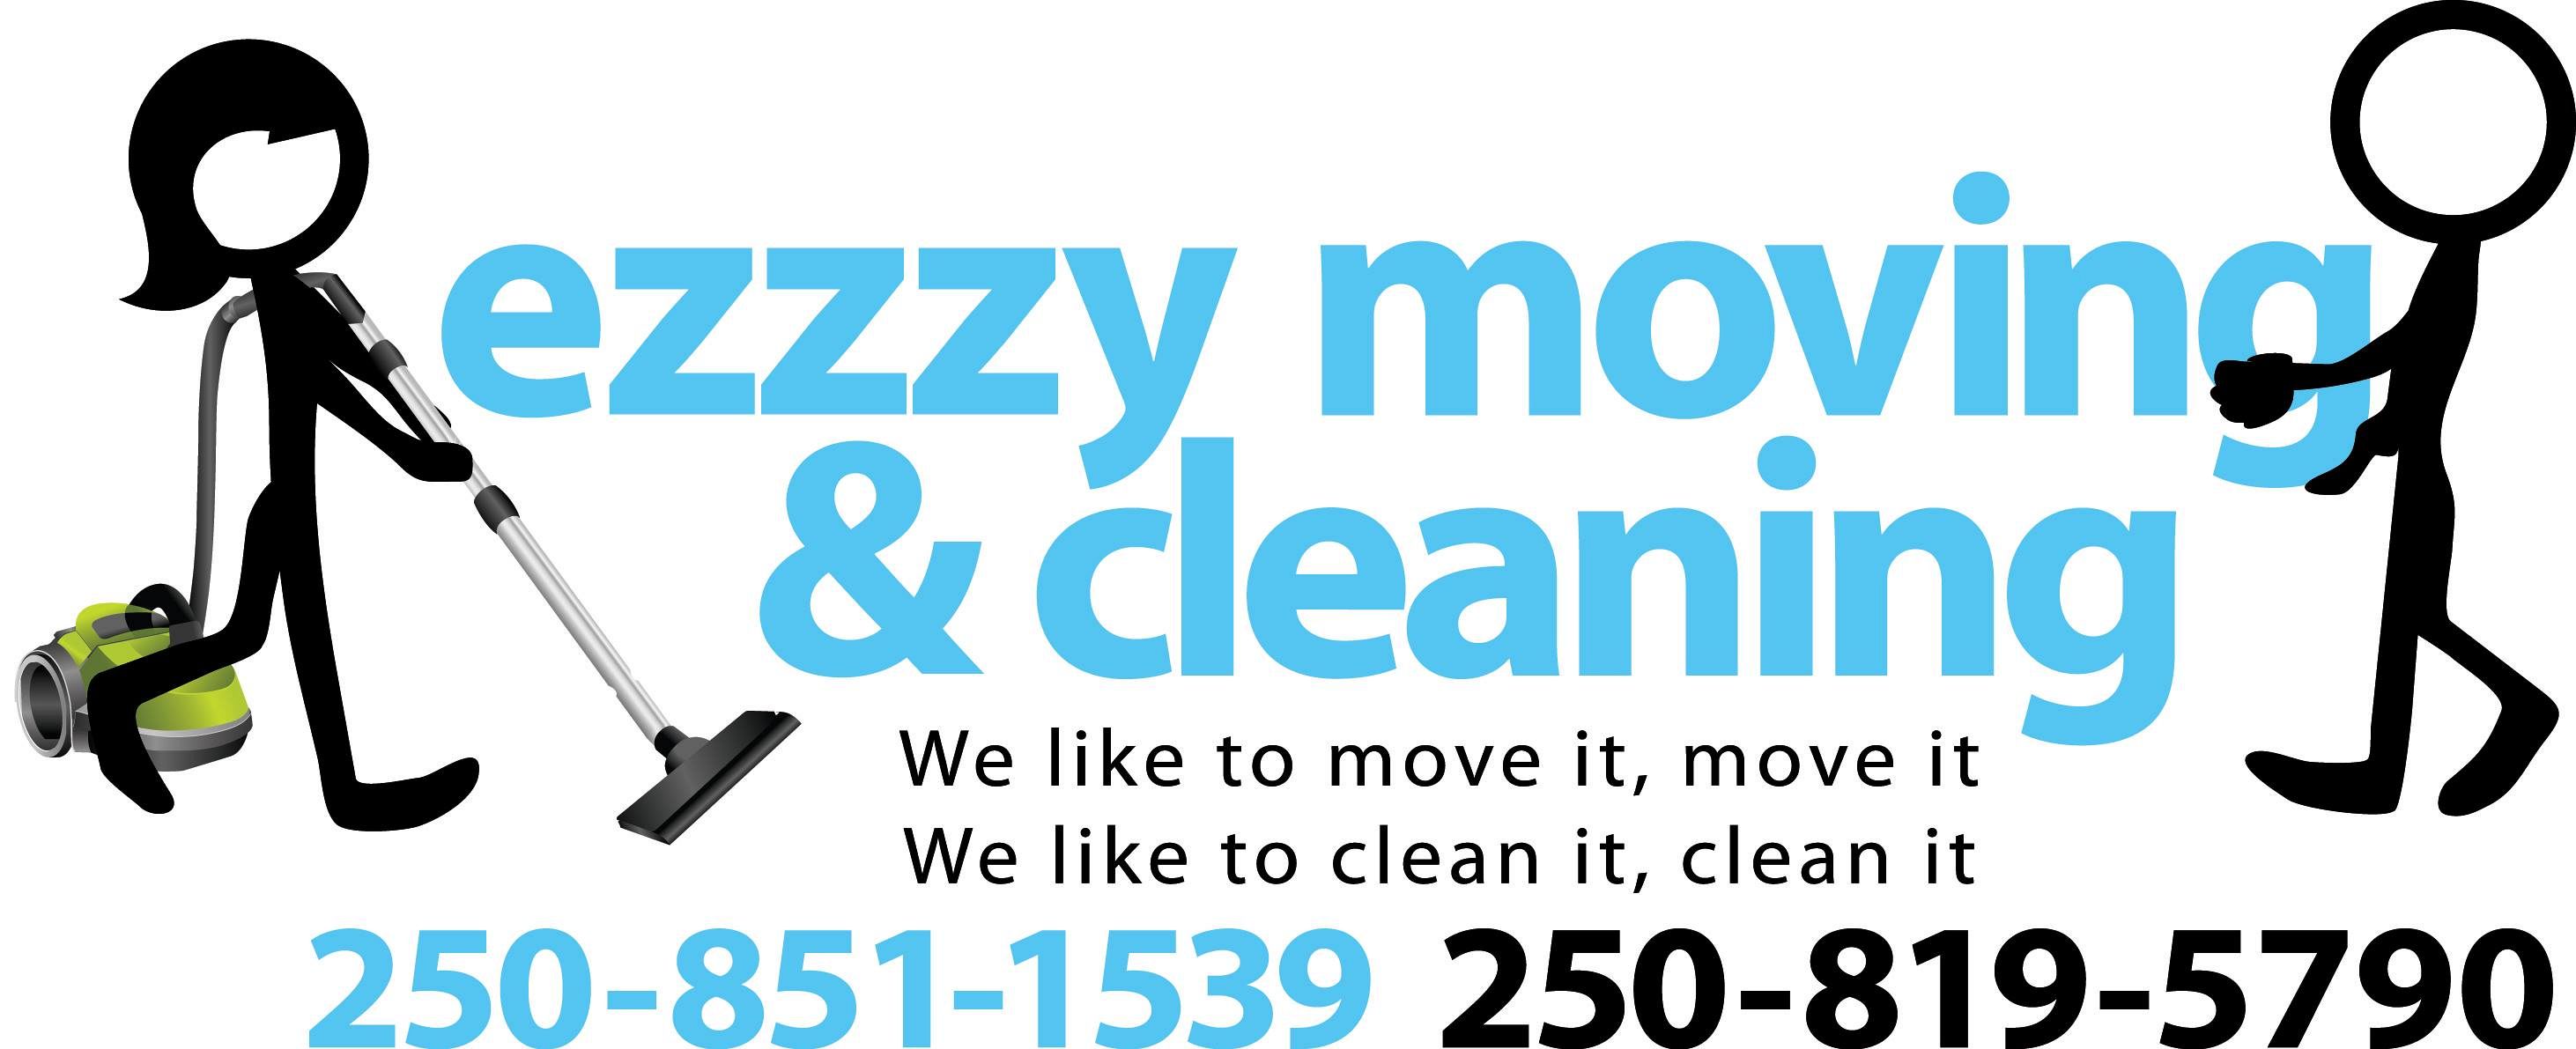 Ezzzy Moving & Cleaning